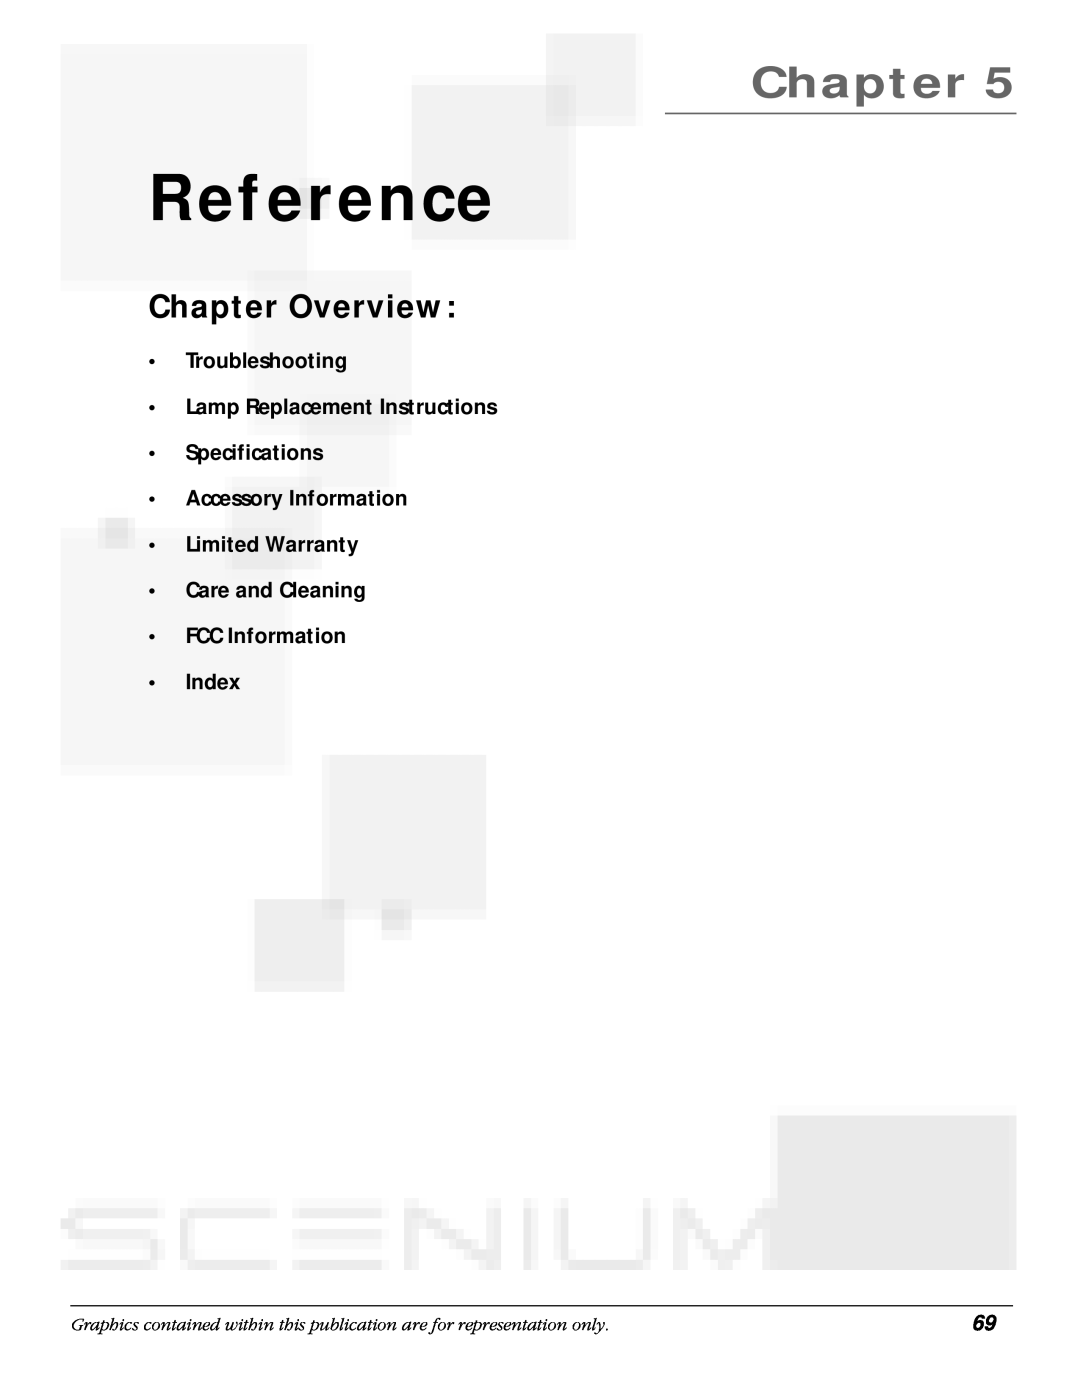 RCA scenium manual Reference, Troubleshooting Lamp Replacement Instructions Specifications, FCC Information Index, Chapter 